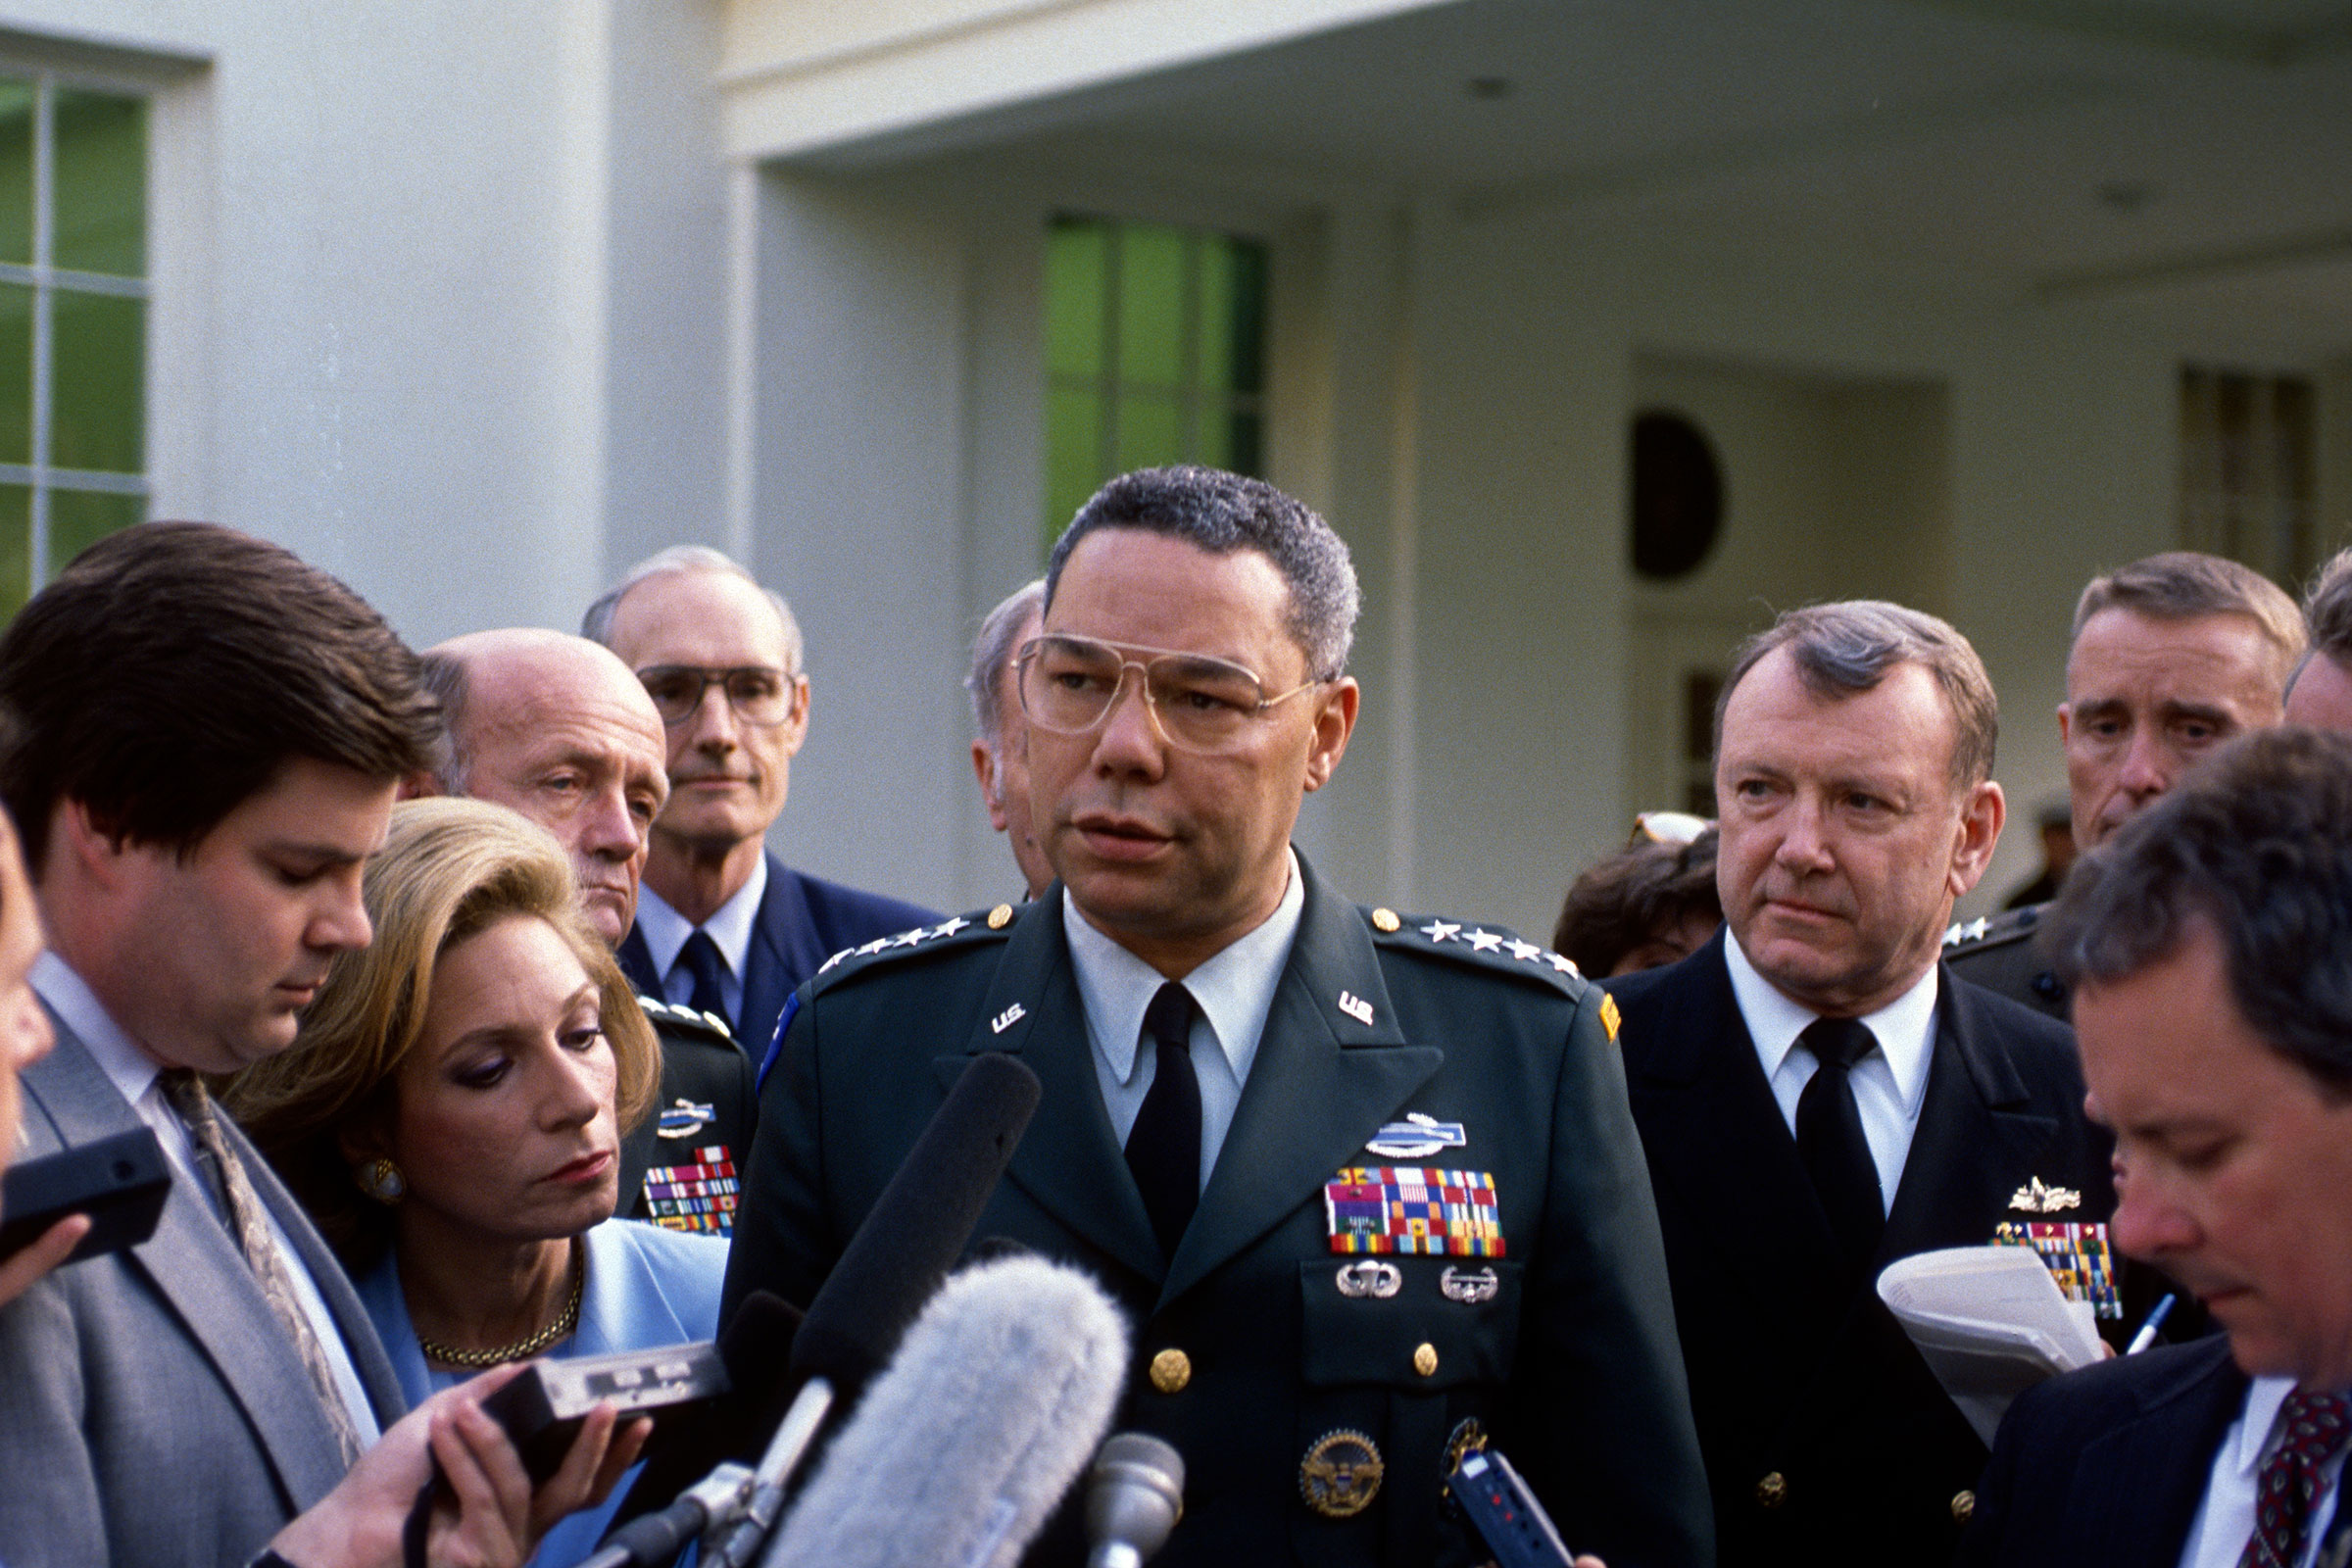 Chairman of the Joint Chiefs of Staff American General Colin Powell talks with reporters in the West Wing driveway, in 1993.